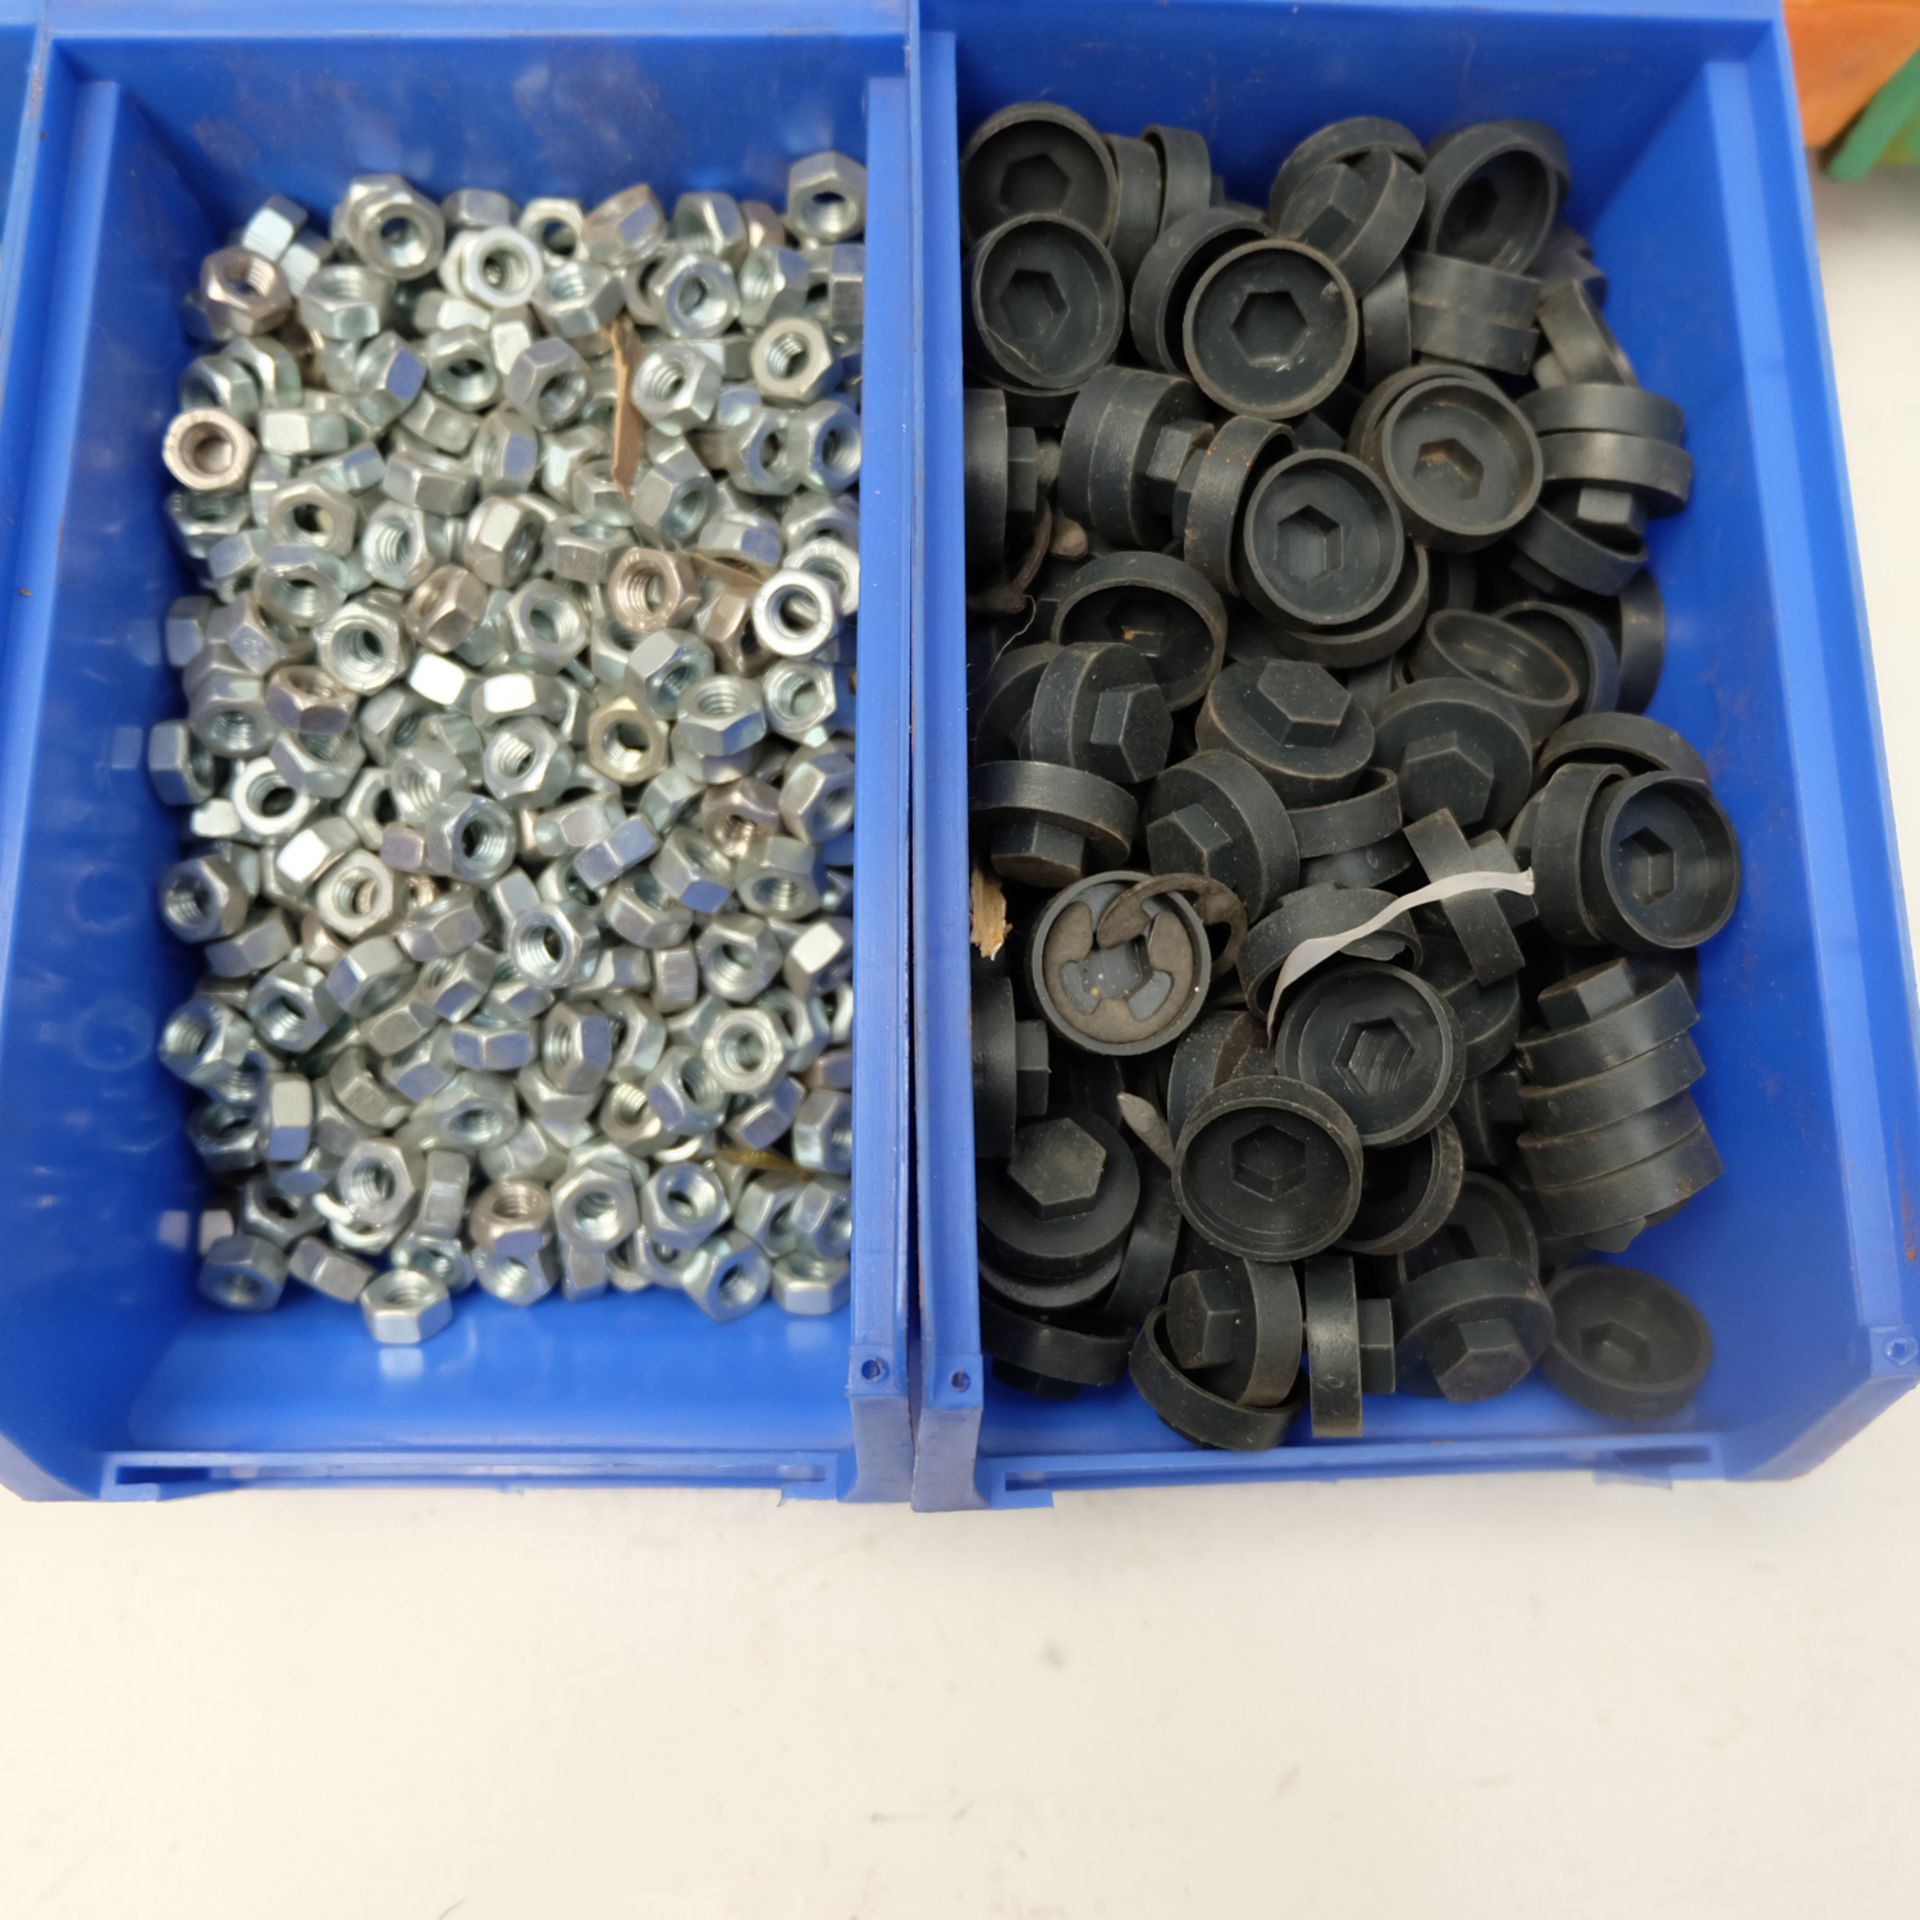 Selection of Miscellaneous Nuts, Bolts, Washers etc. - Image 3 of 9